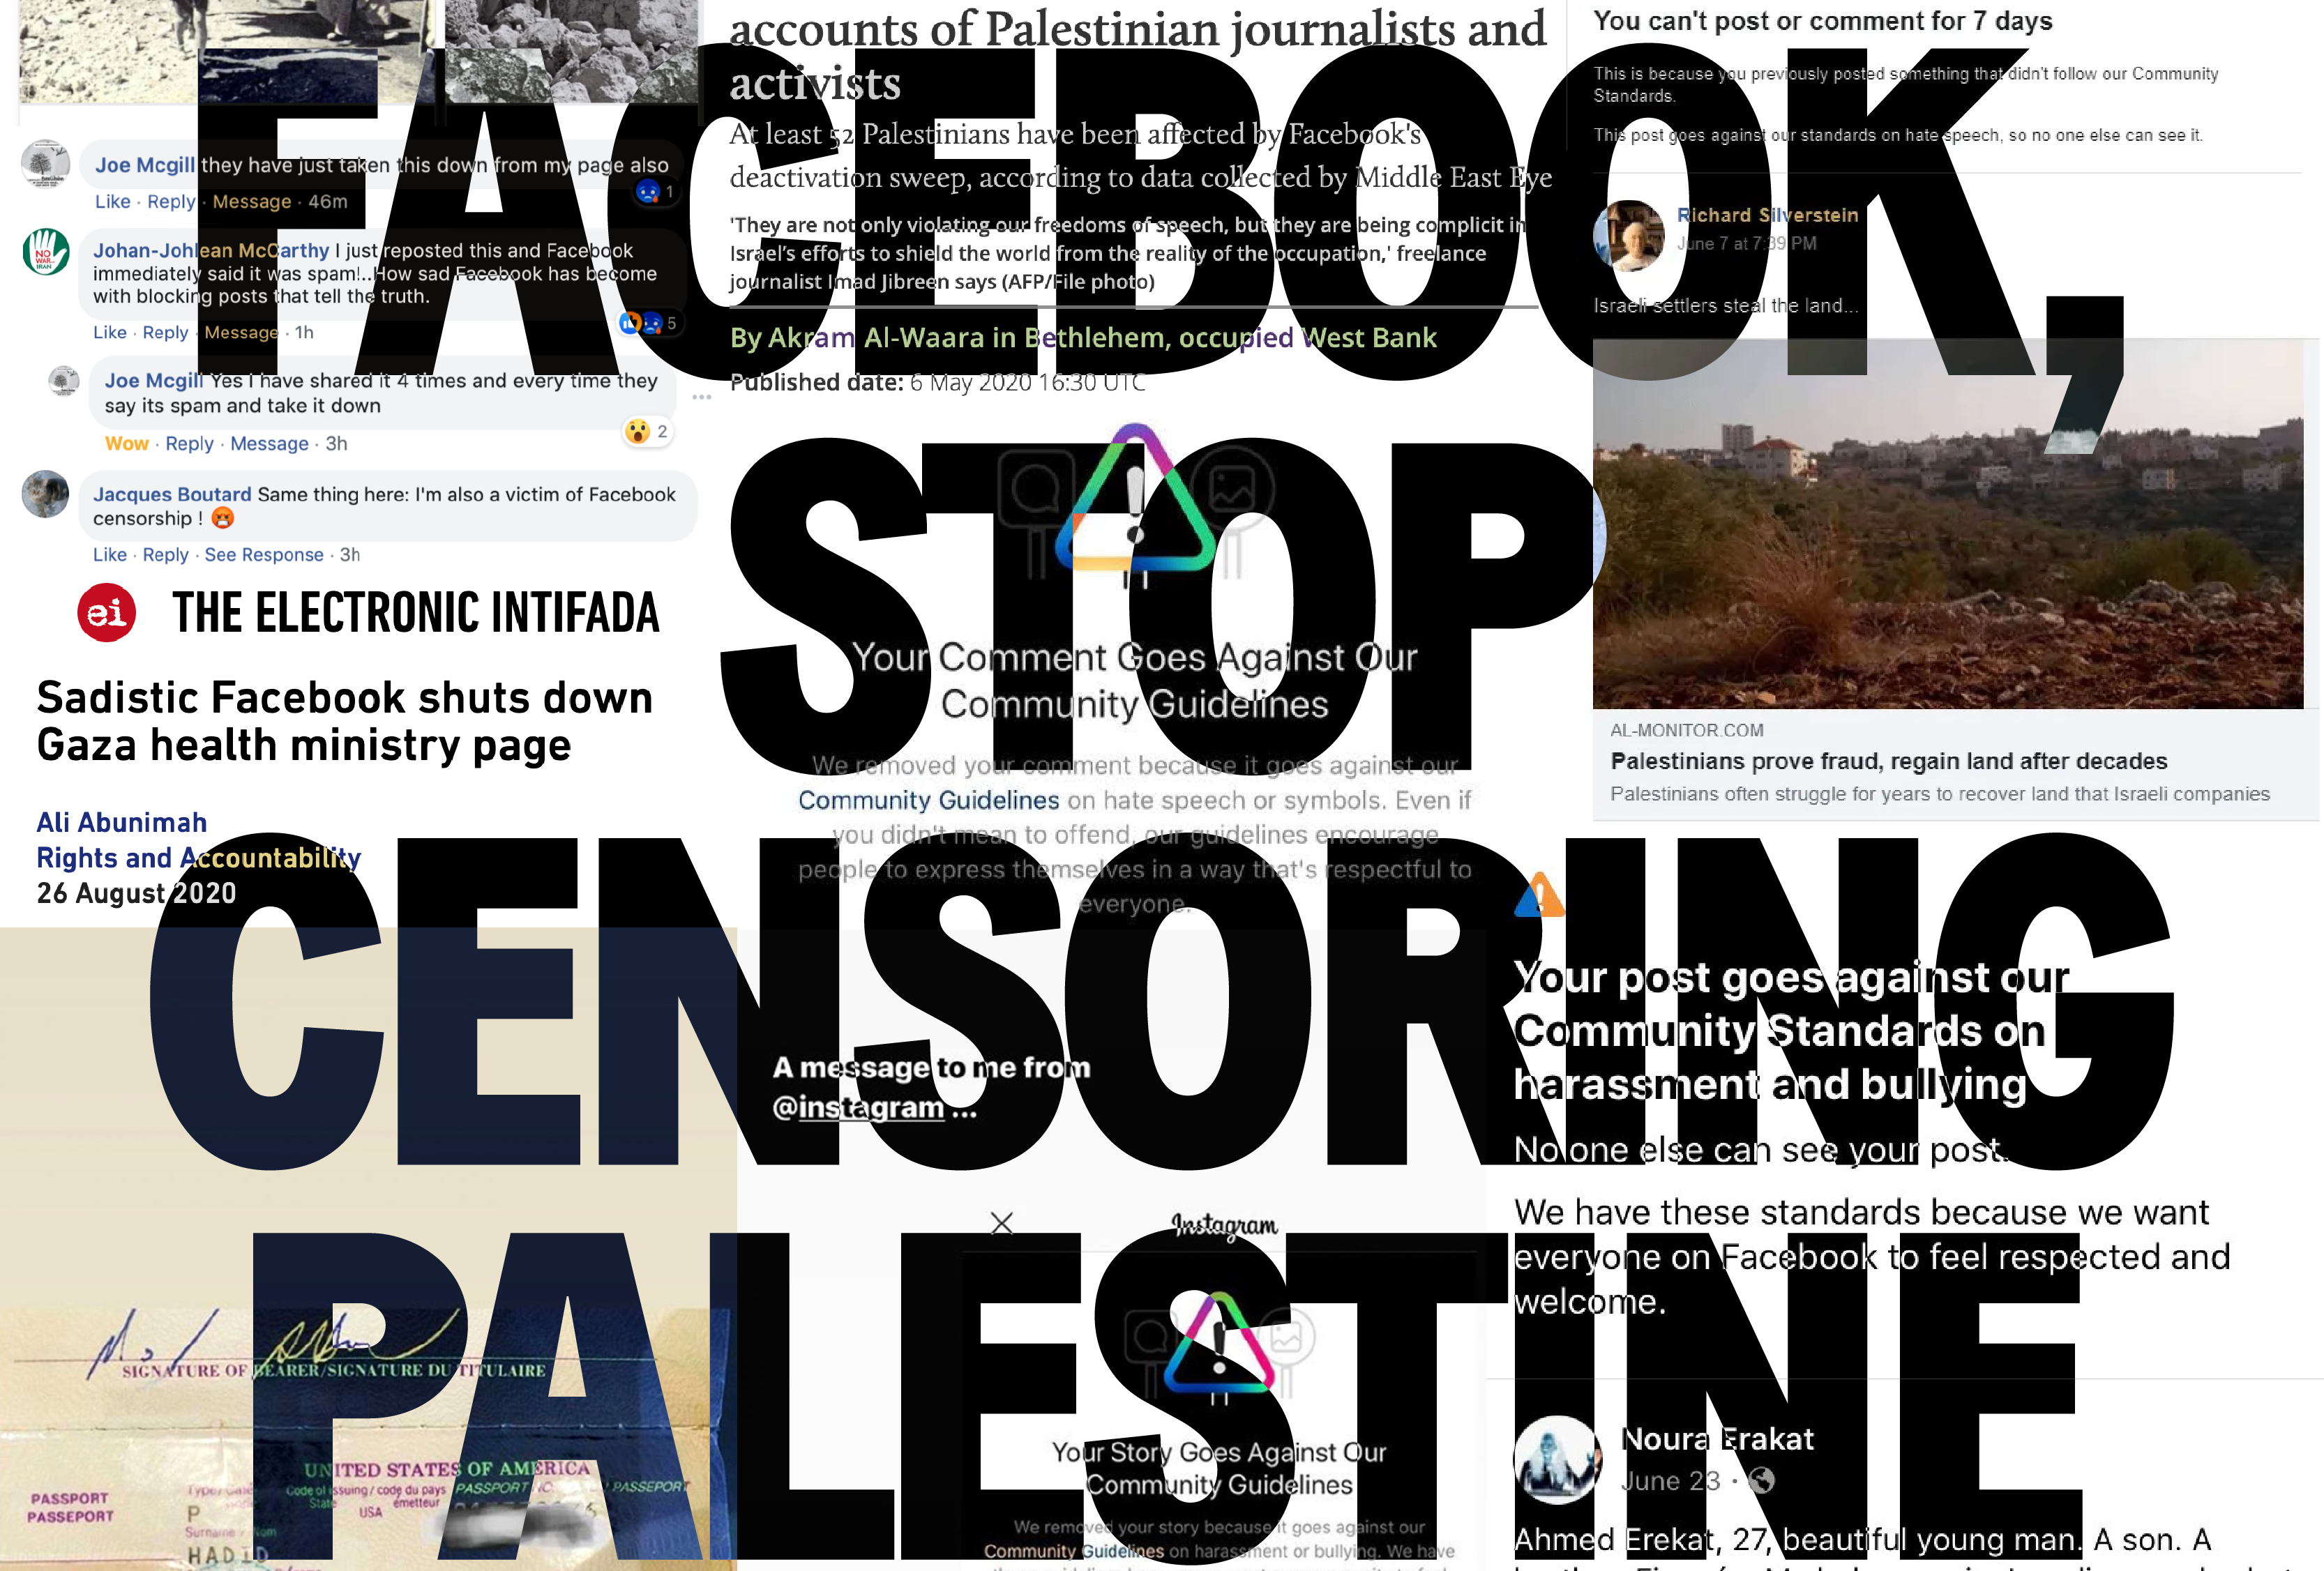 Social media watch group: New violations of Palestinian digital content in the first month of 2021